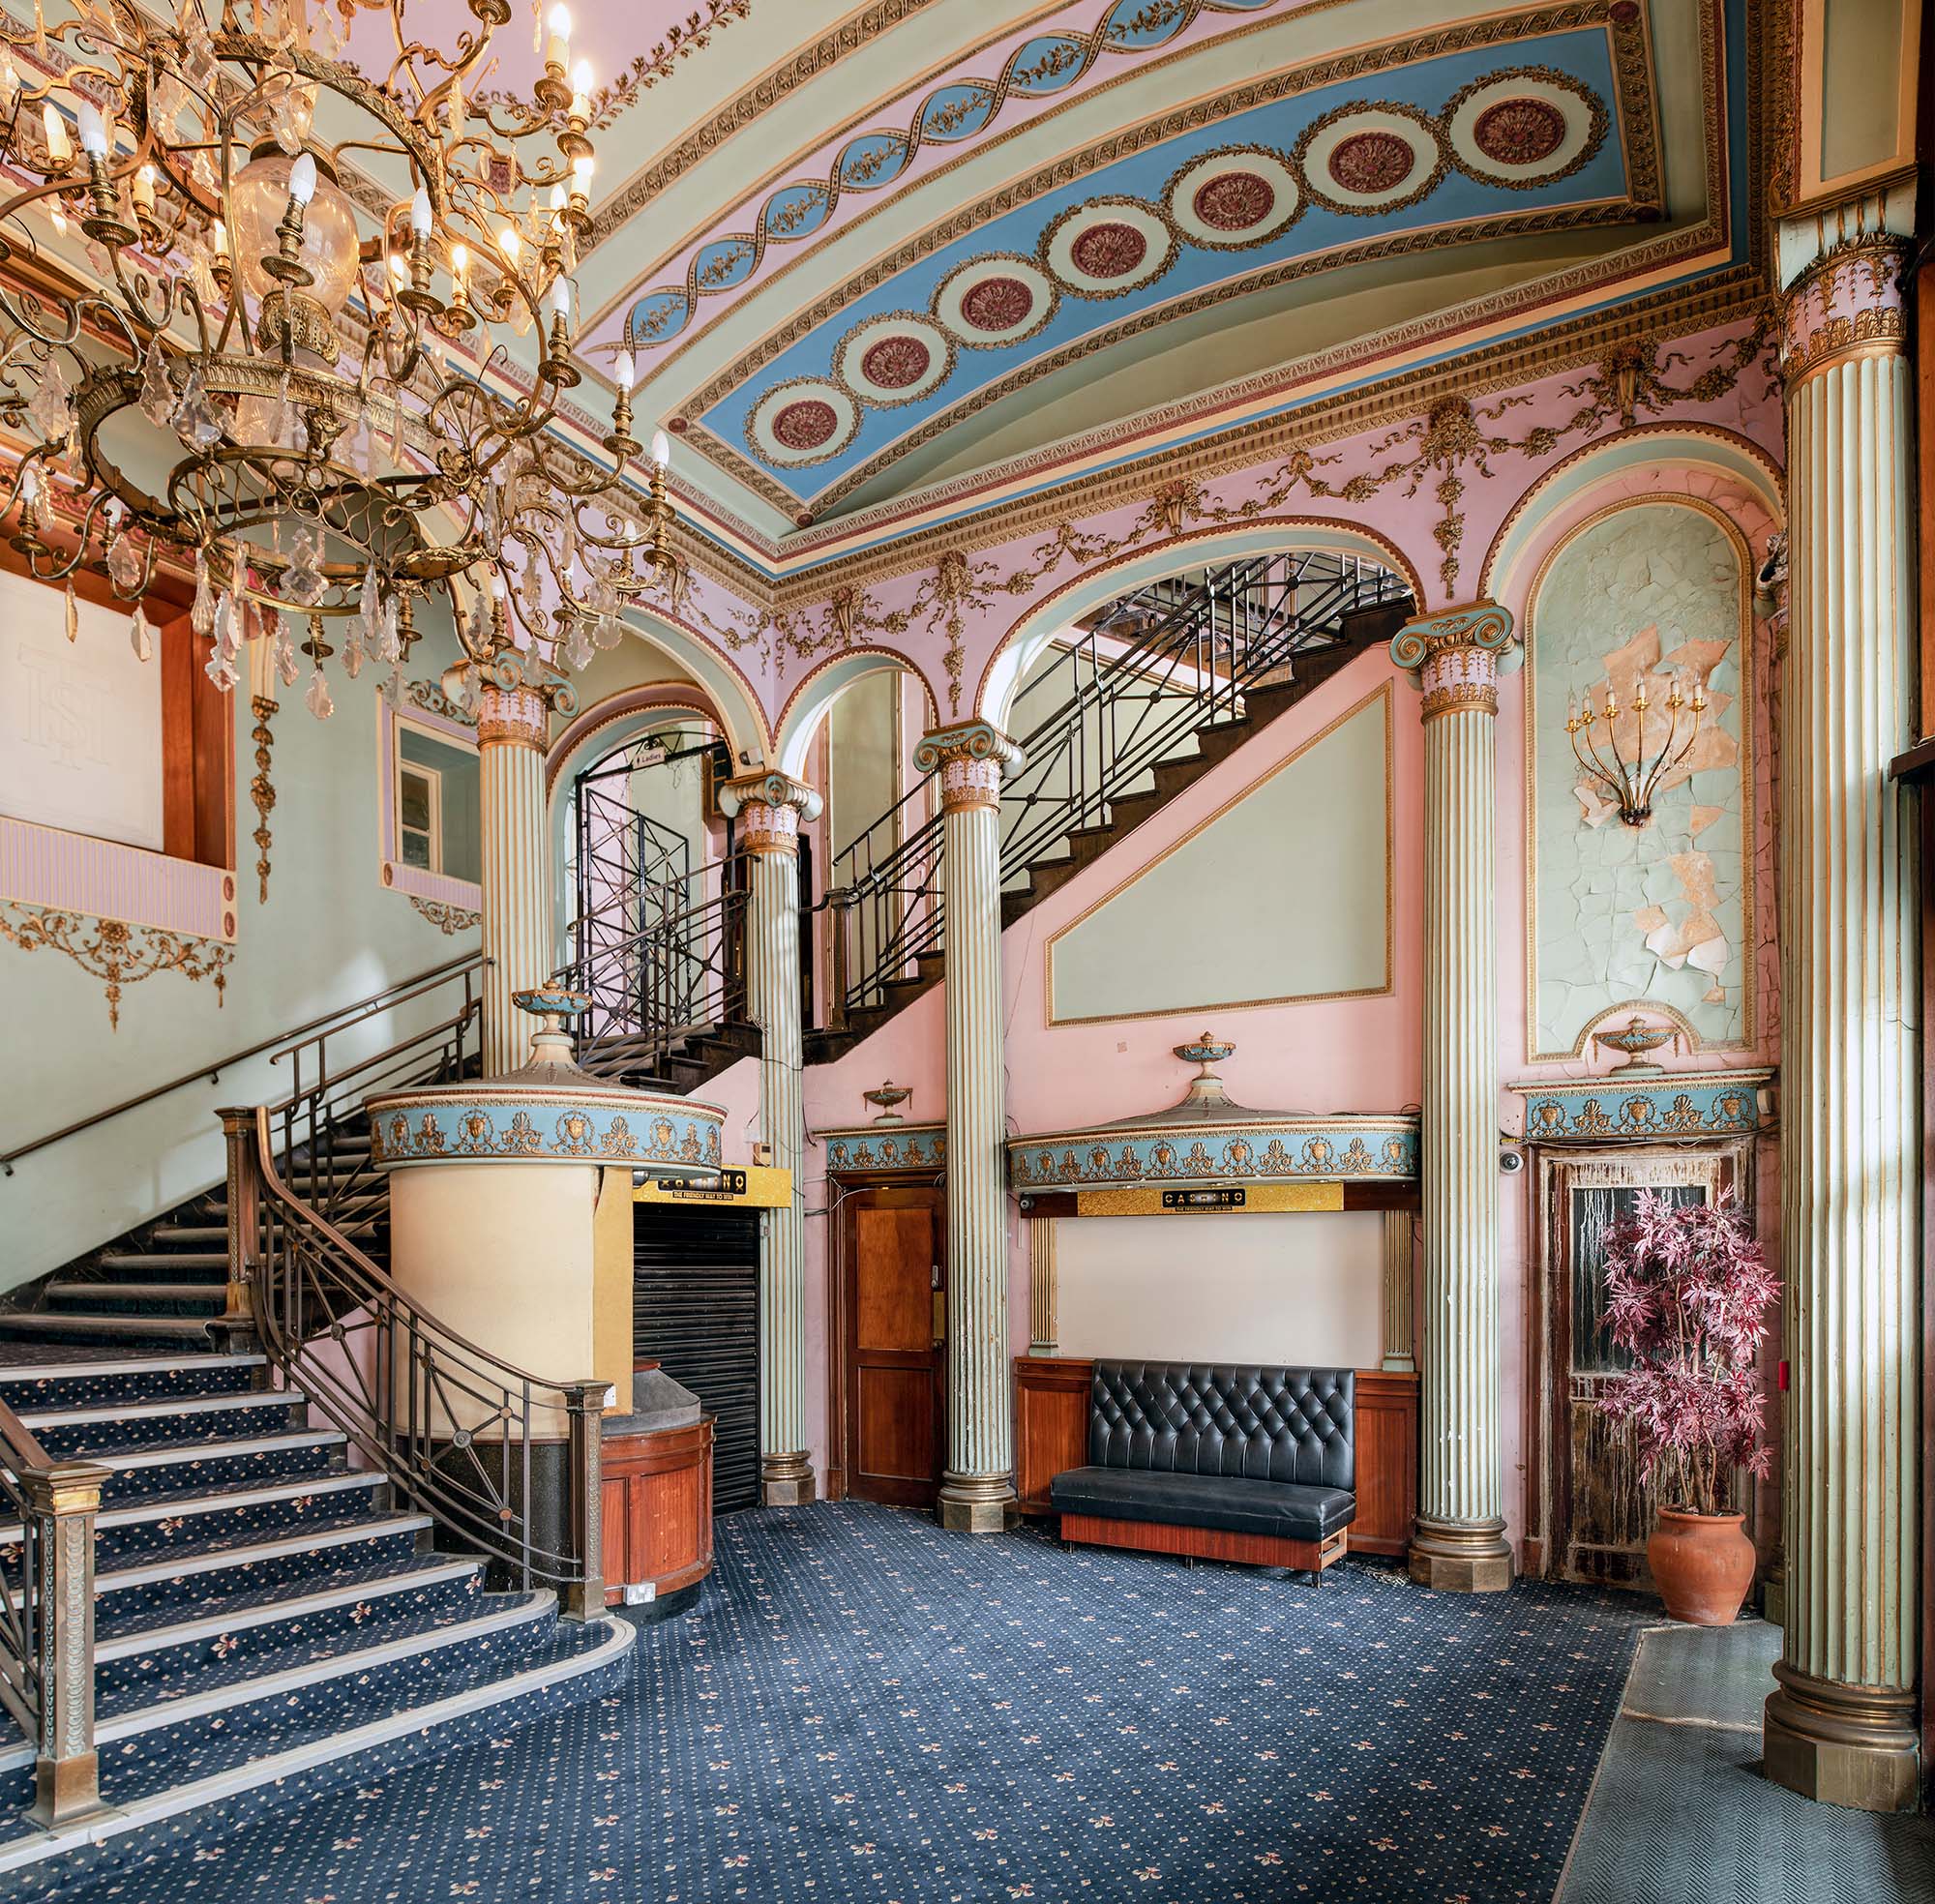 View of the Streatham Hill Theatre foyer with decorated walls, ceiling and chandelier